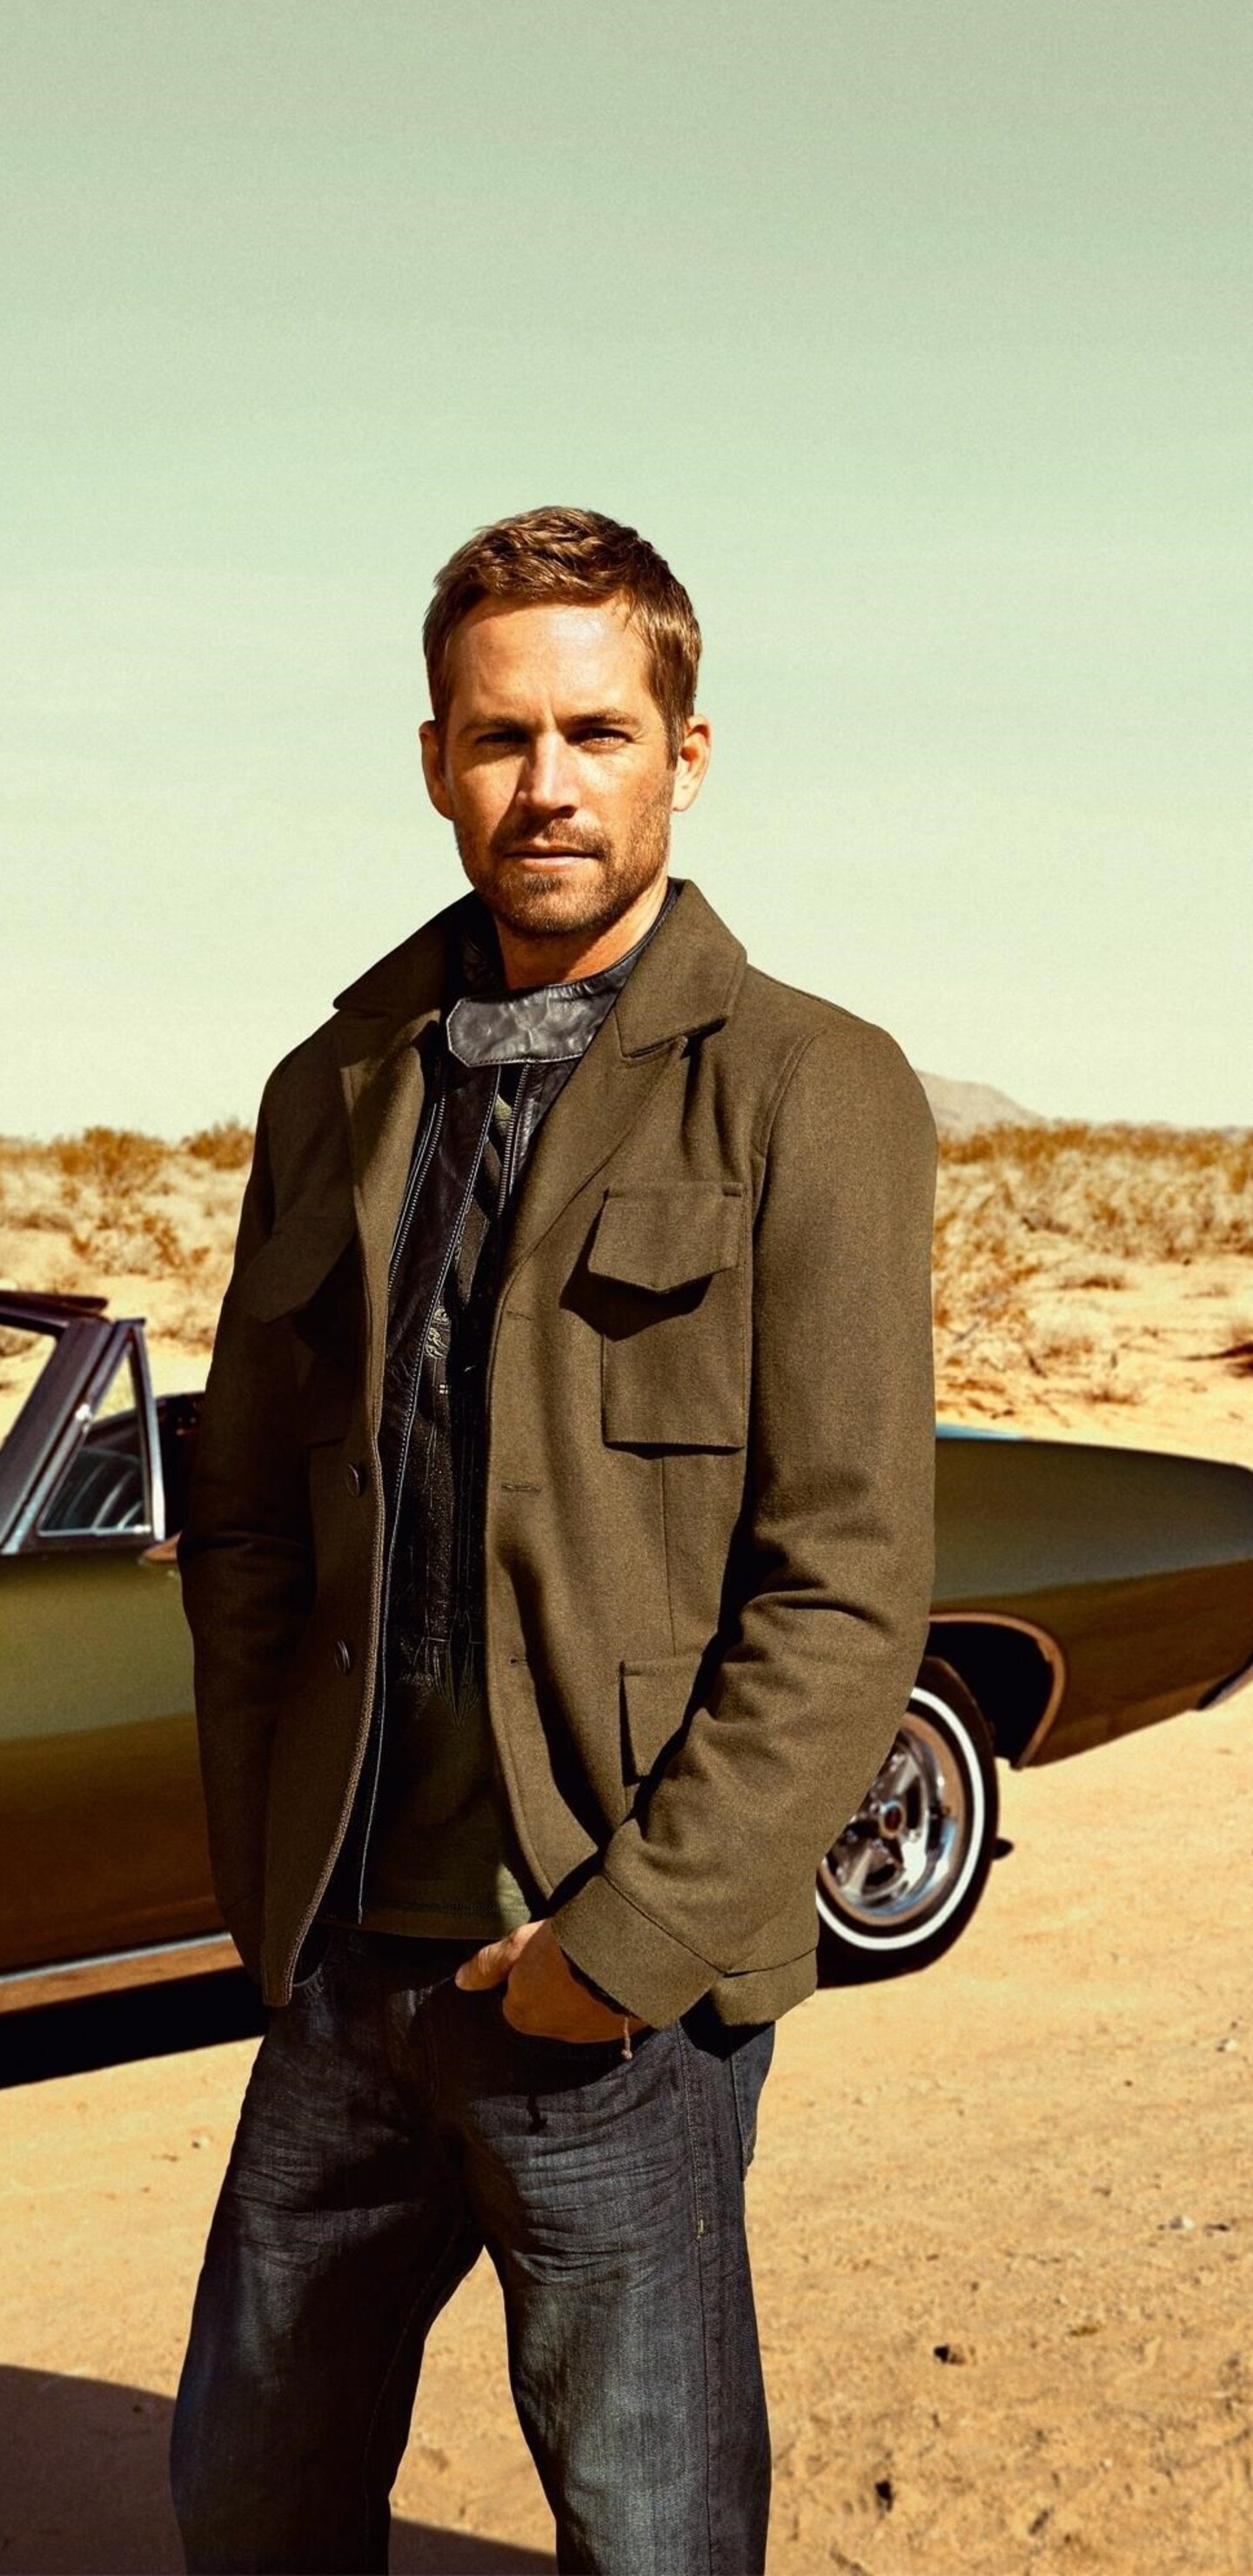 Paul Walker, Car enthusiast, Samsung Galaxy Note wallpapers, High-resolution images, 1440x2960 HD Phone